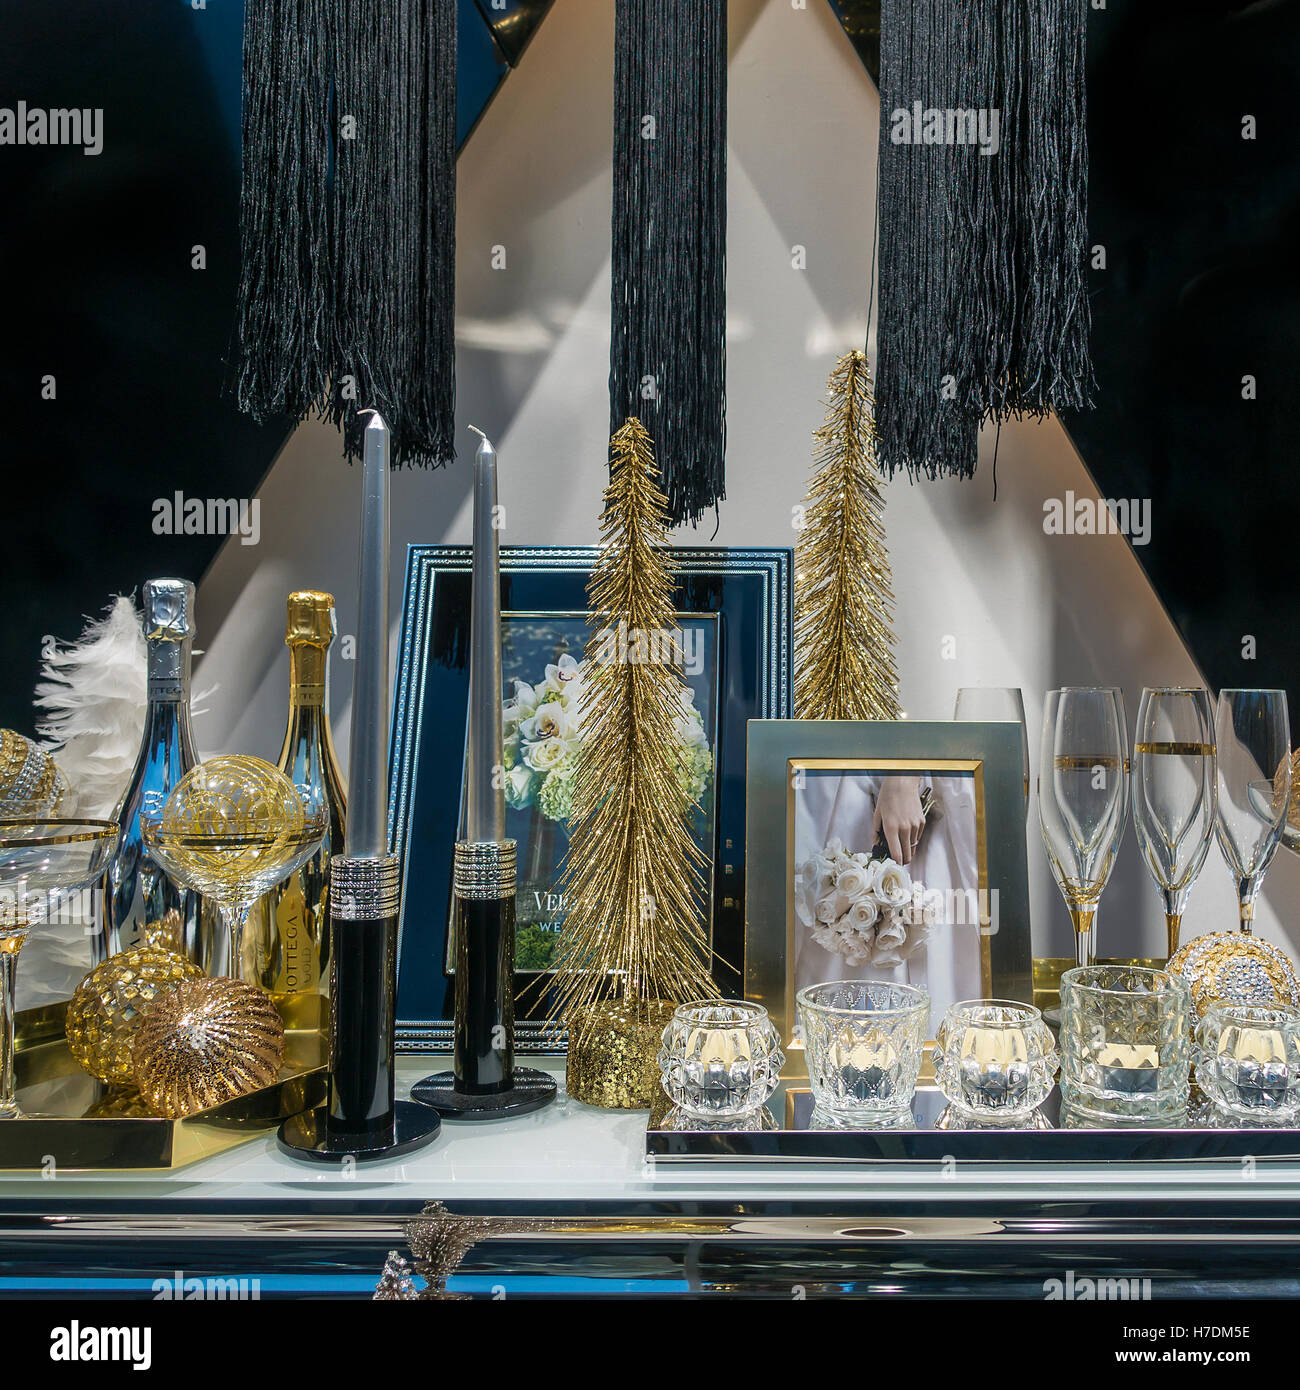 Festively Decorated Boutique Windows on 5th Avenue in New York City  Editorial Photography - Image of boutique, holidays: 237107497